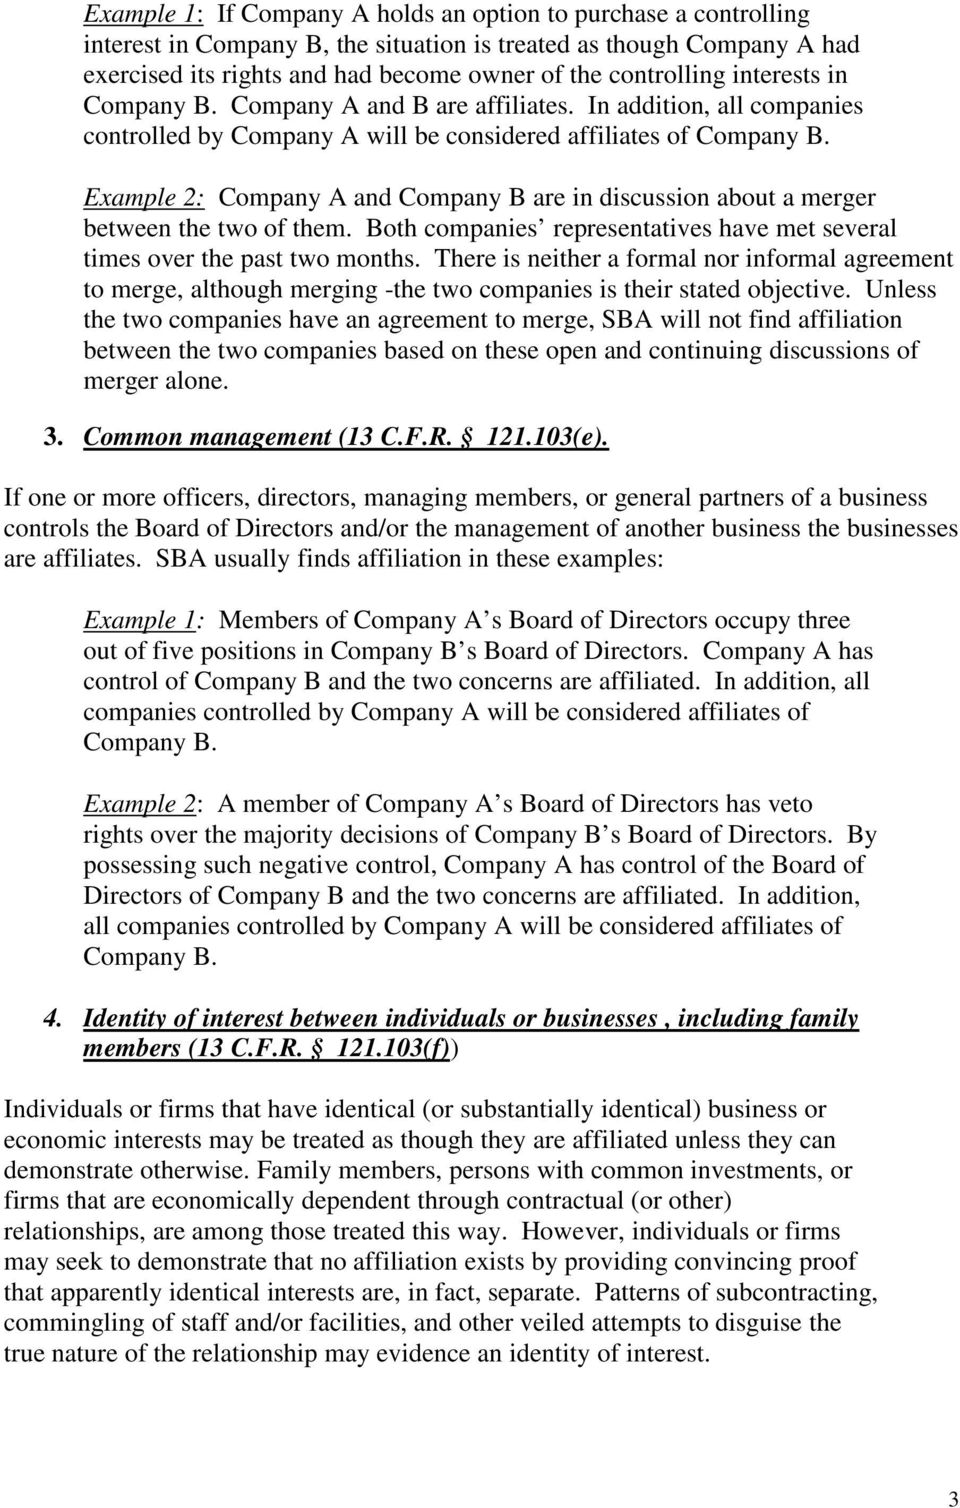 Example 2: Company A and Company B are in discussion about a merger between the two of them. Both companies representatives have met several times over the past two months.